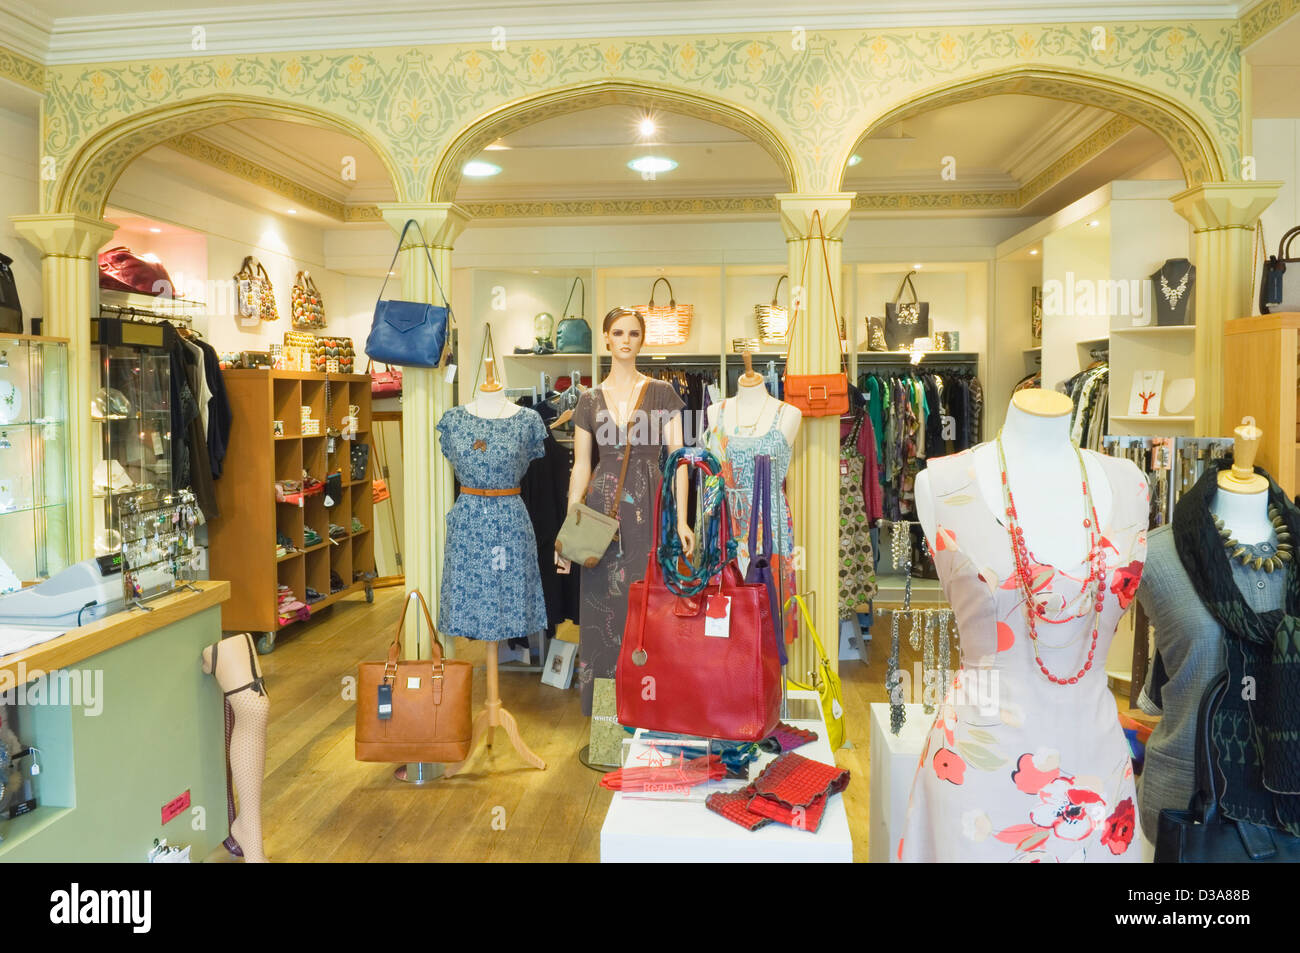 Ladies Clothes Shop Interior High Resolution Stock Photography and Images -  Alamy